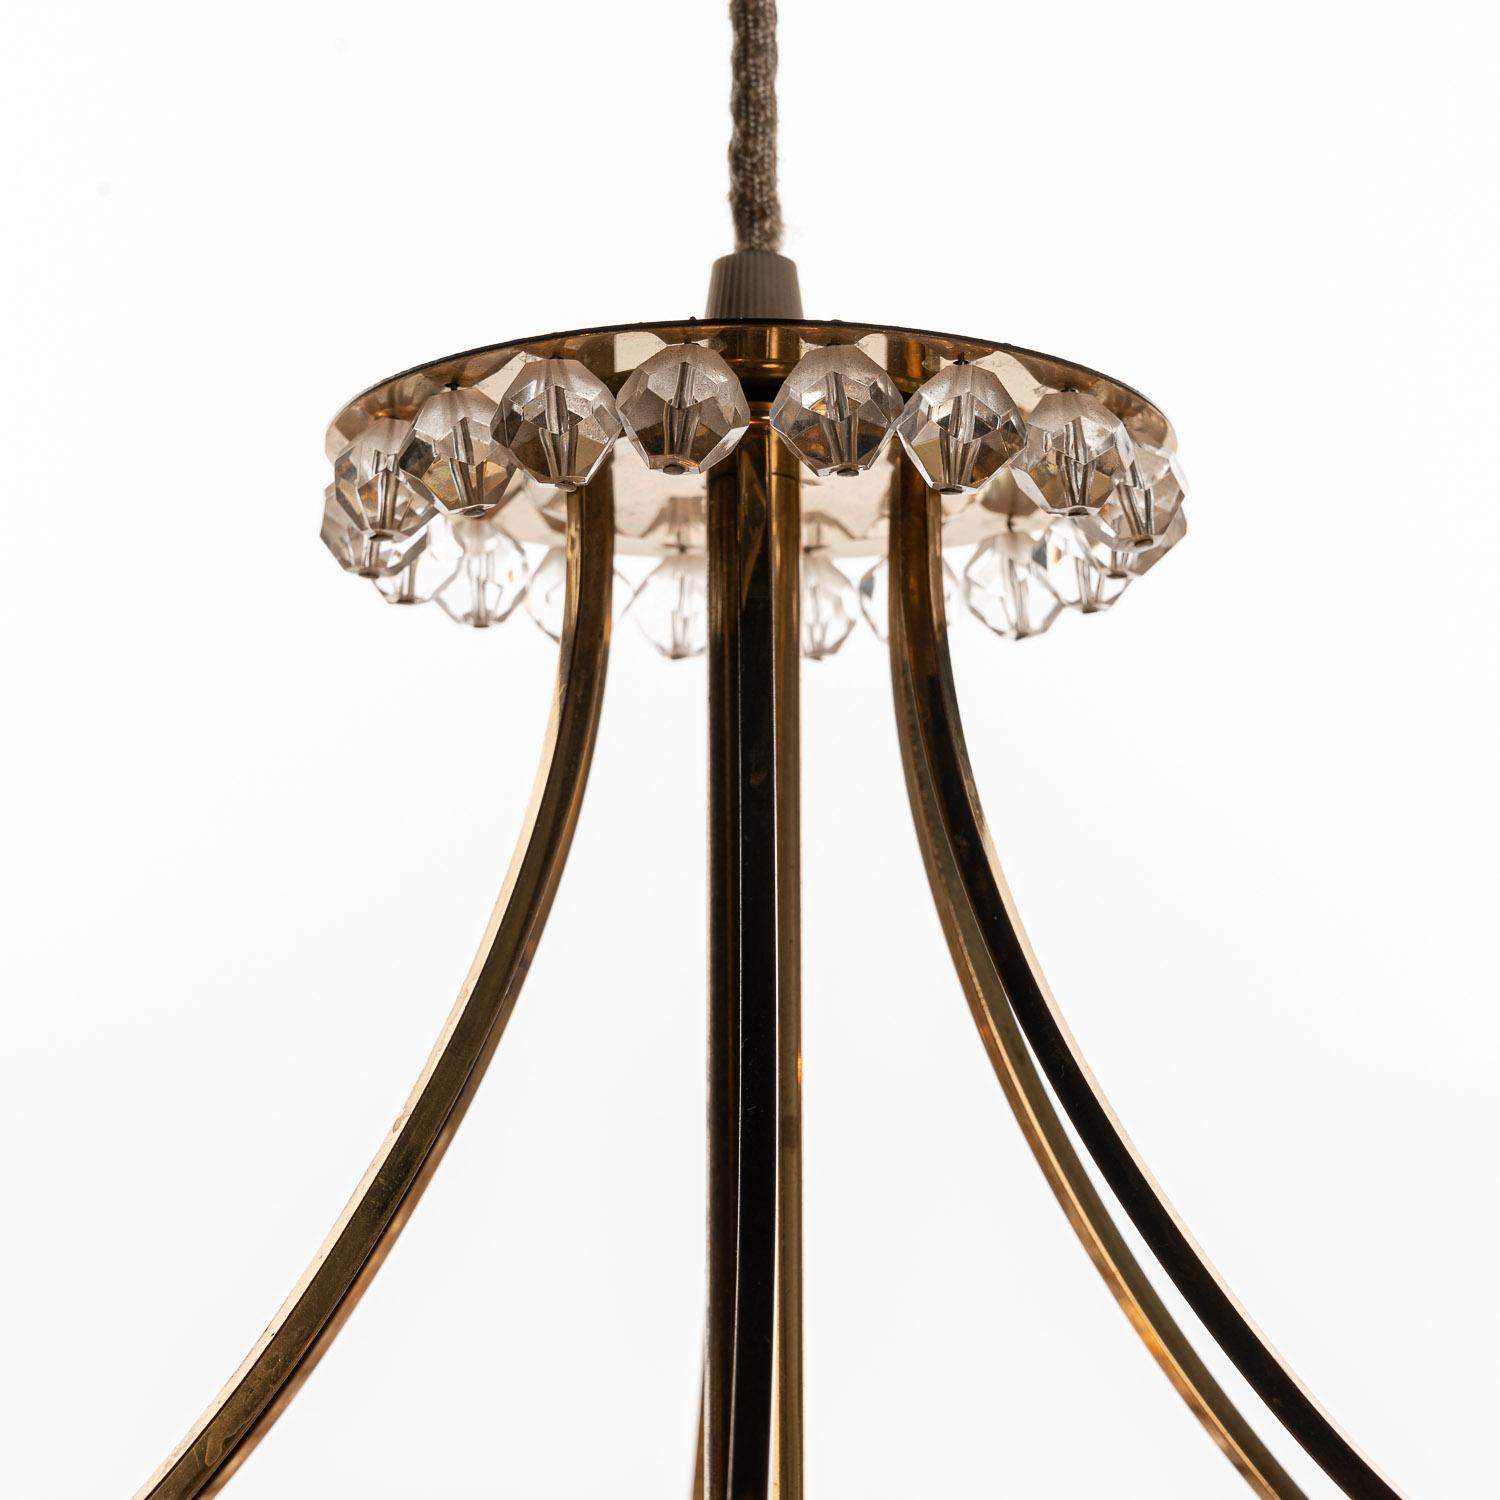 1950’s Brass, Lucite & Crystal Chandelier by Emil Stejnar for Rupert Nikoll In Good Condition For Sale In Amsterdam, NH